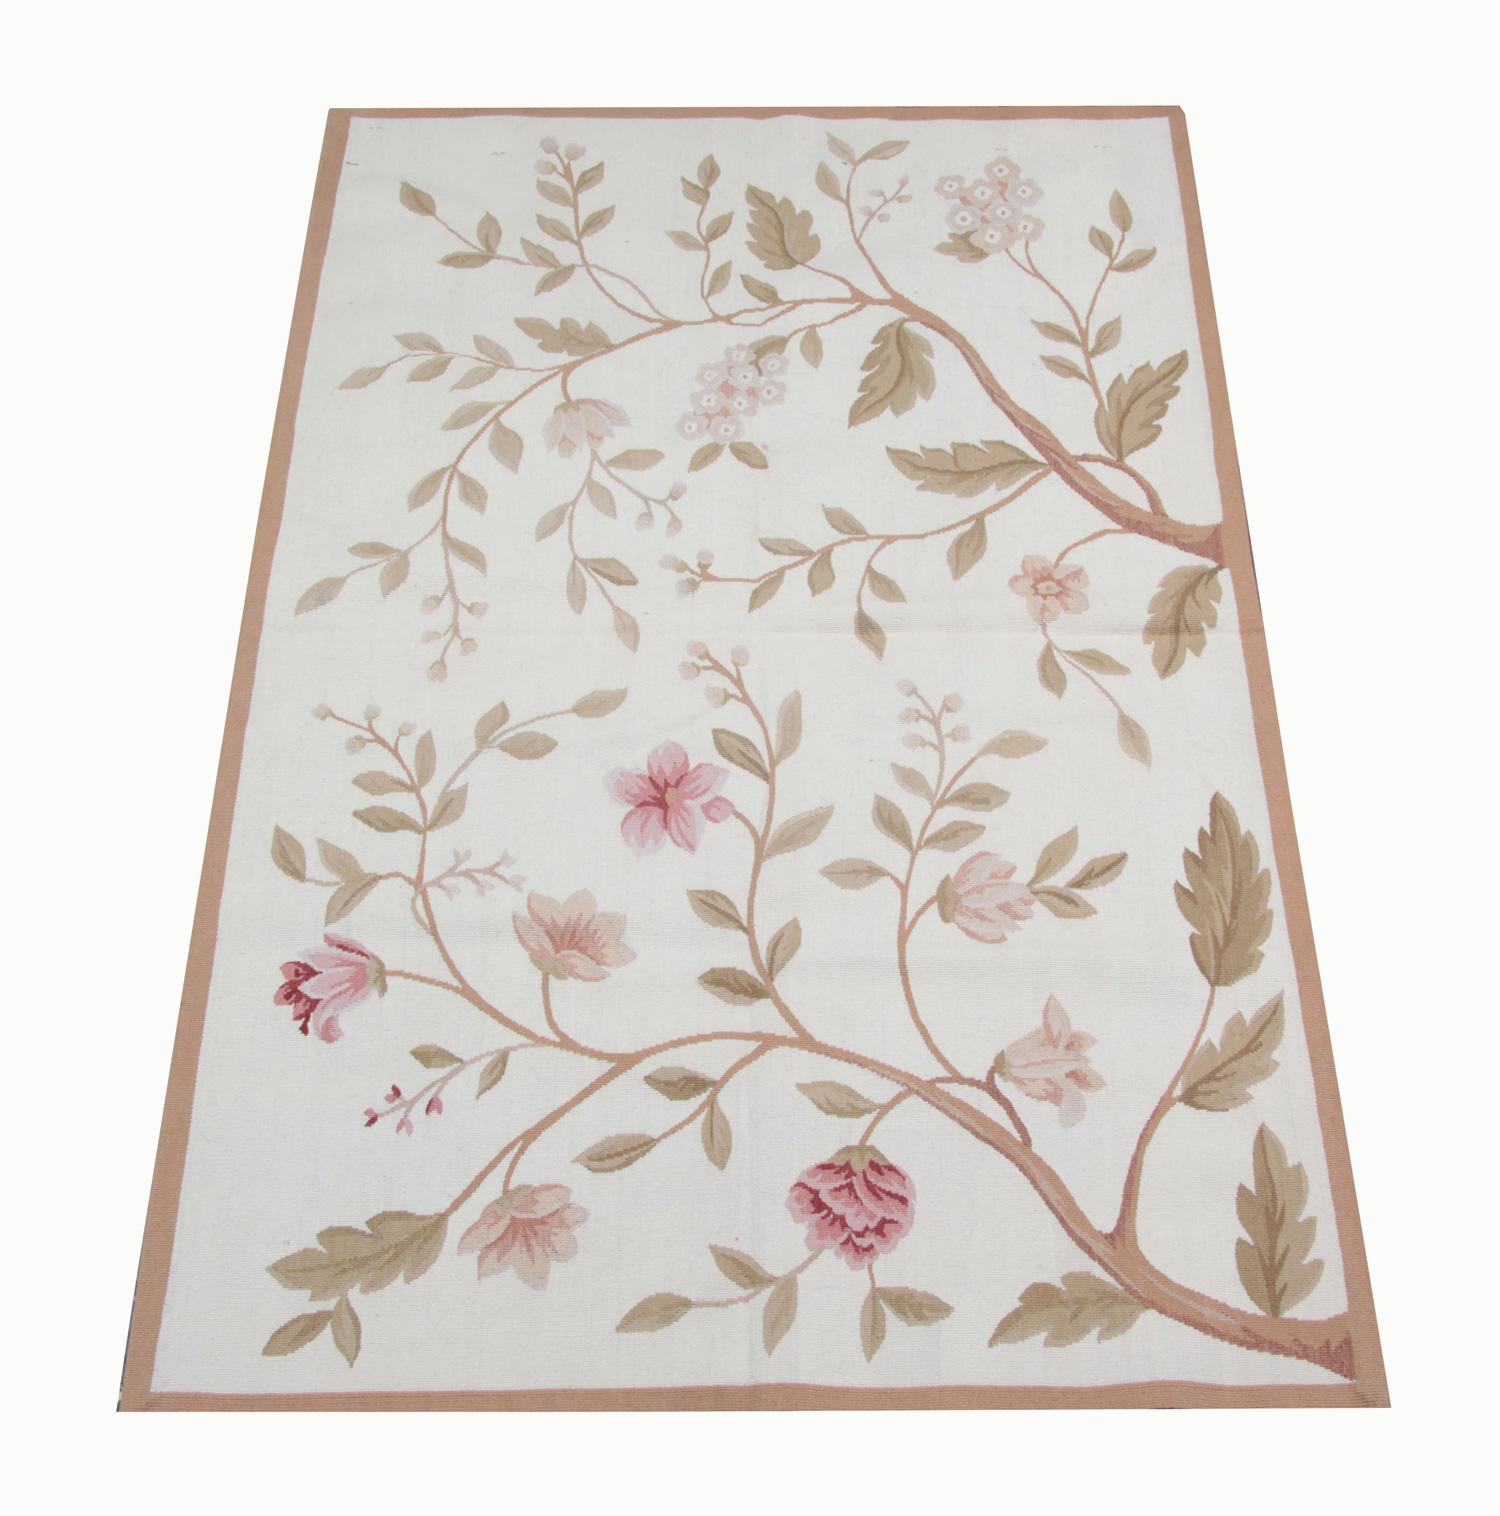 This handmade carpet, oriental rug Beige cream rug is the very good item as living room rugs and getting most of the attention in rug store by clients because of the colour and design. These handmade elegant Chinese Aubusson floor rugs have The soft